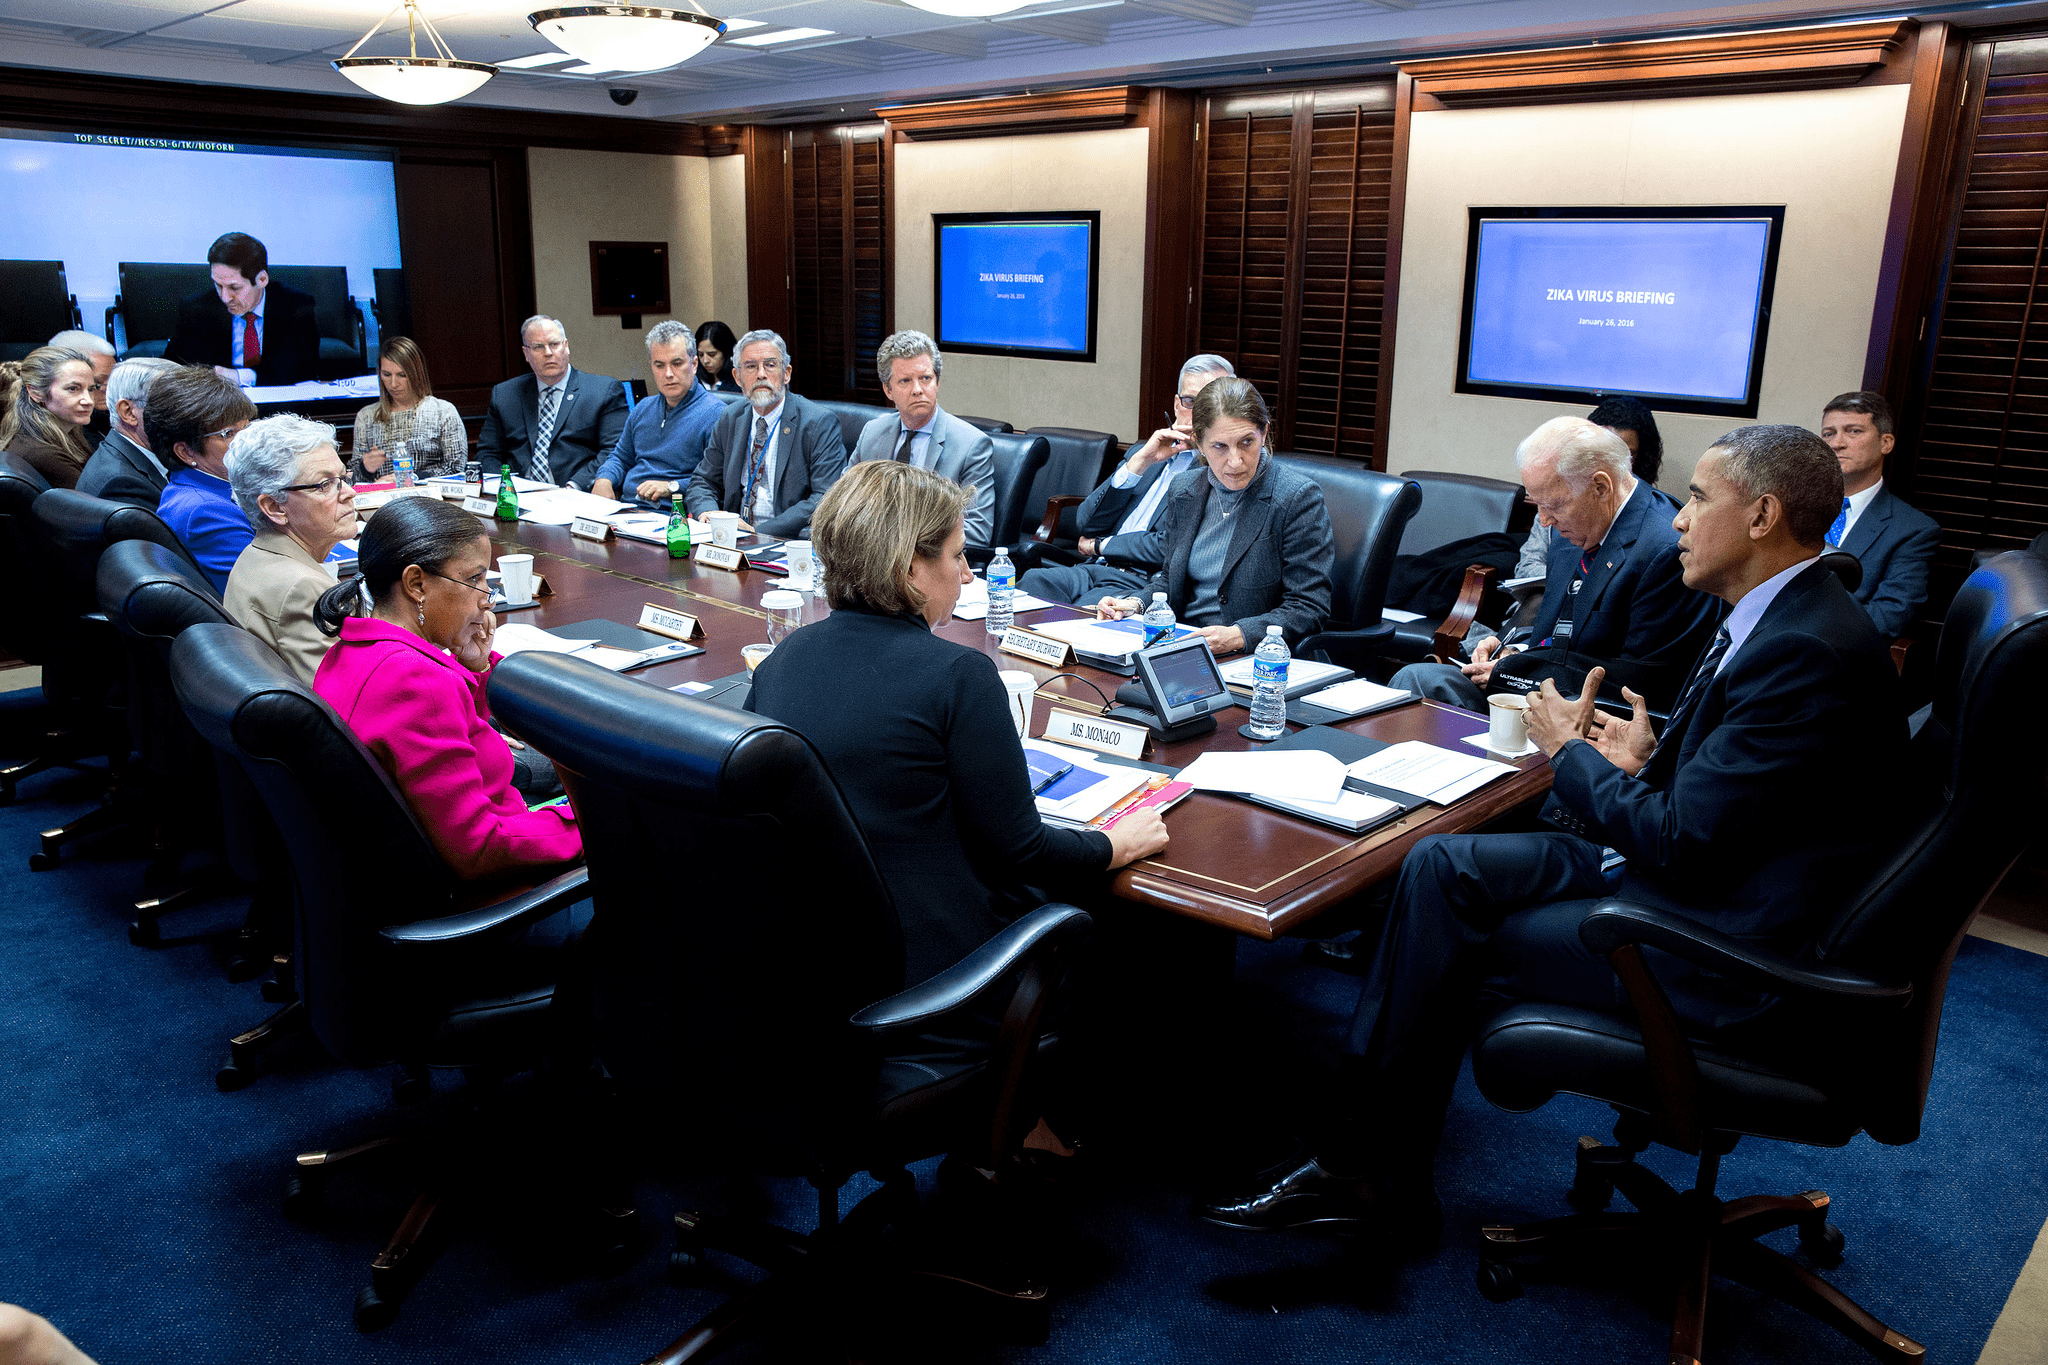 The President of the United States and his cabinet meet regarding the Zika Virus